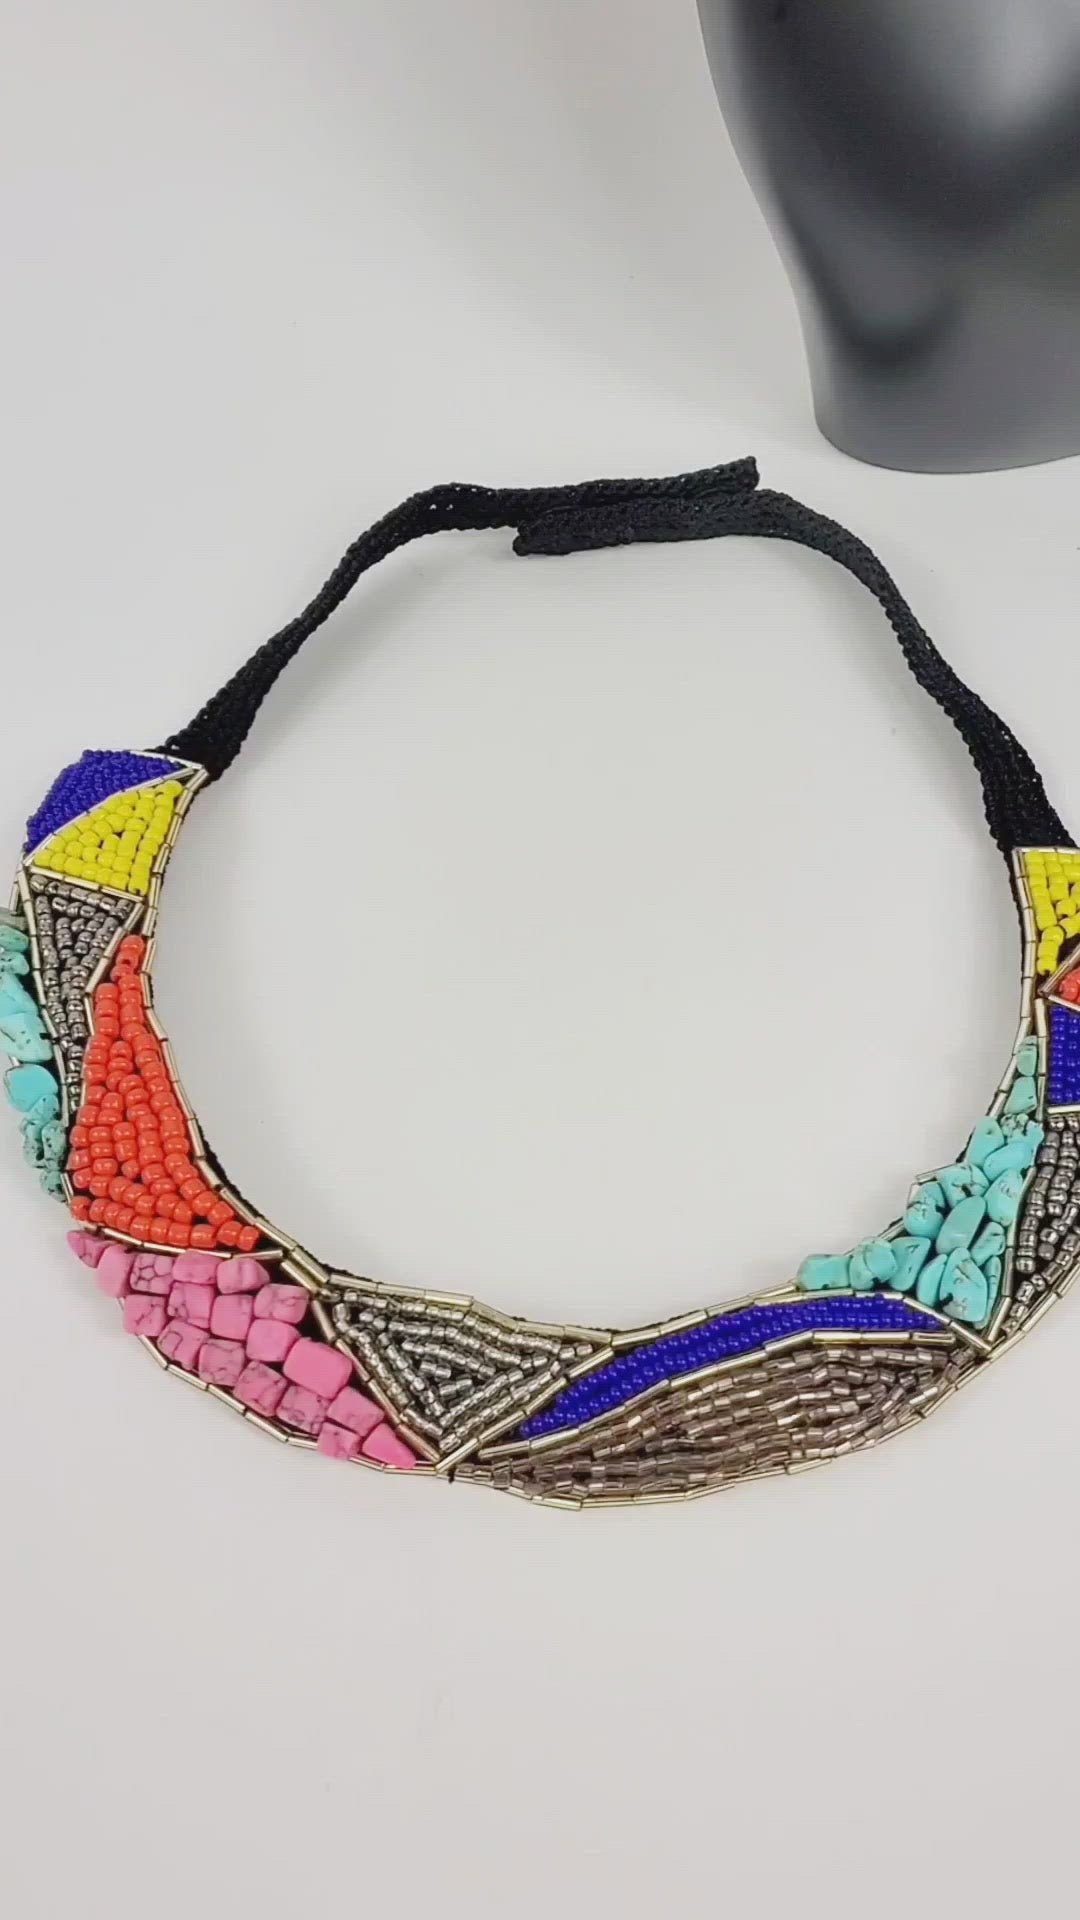 Crochet based embroidery necklace with seed and bugle beads, sequins and semiprecious gemstones.